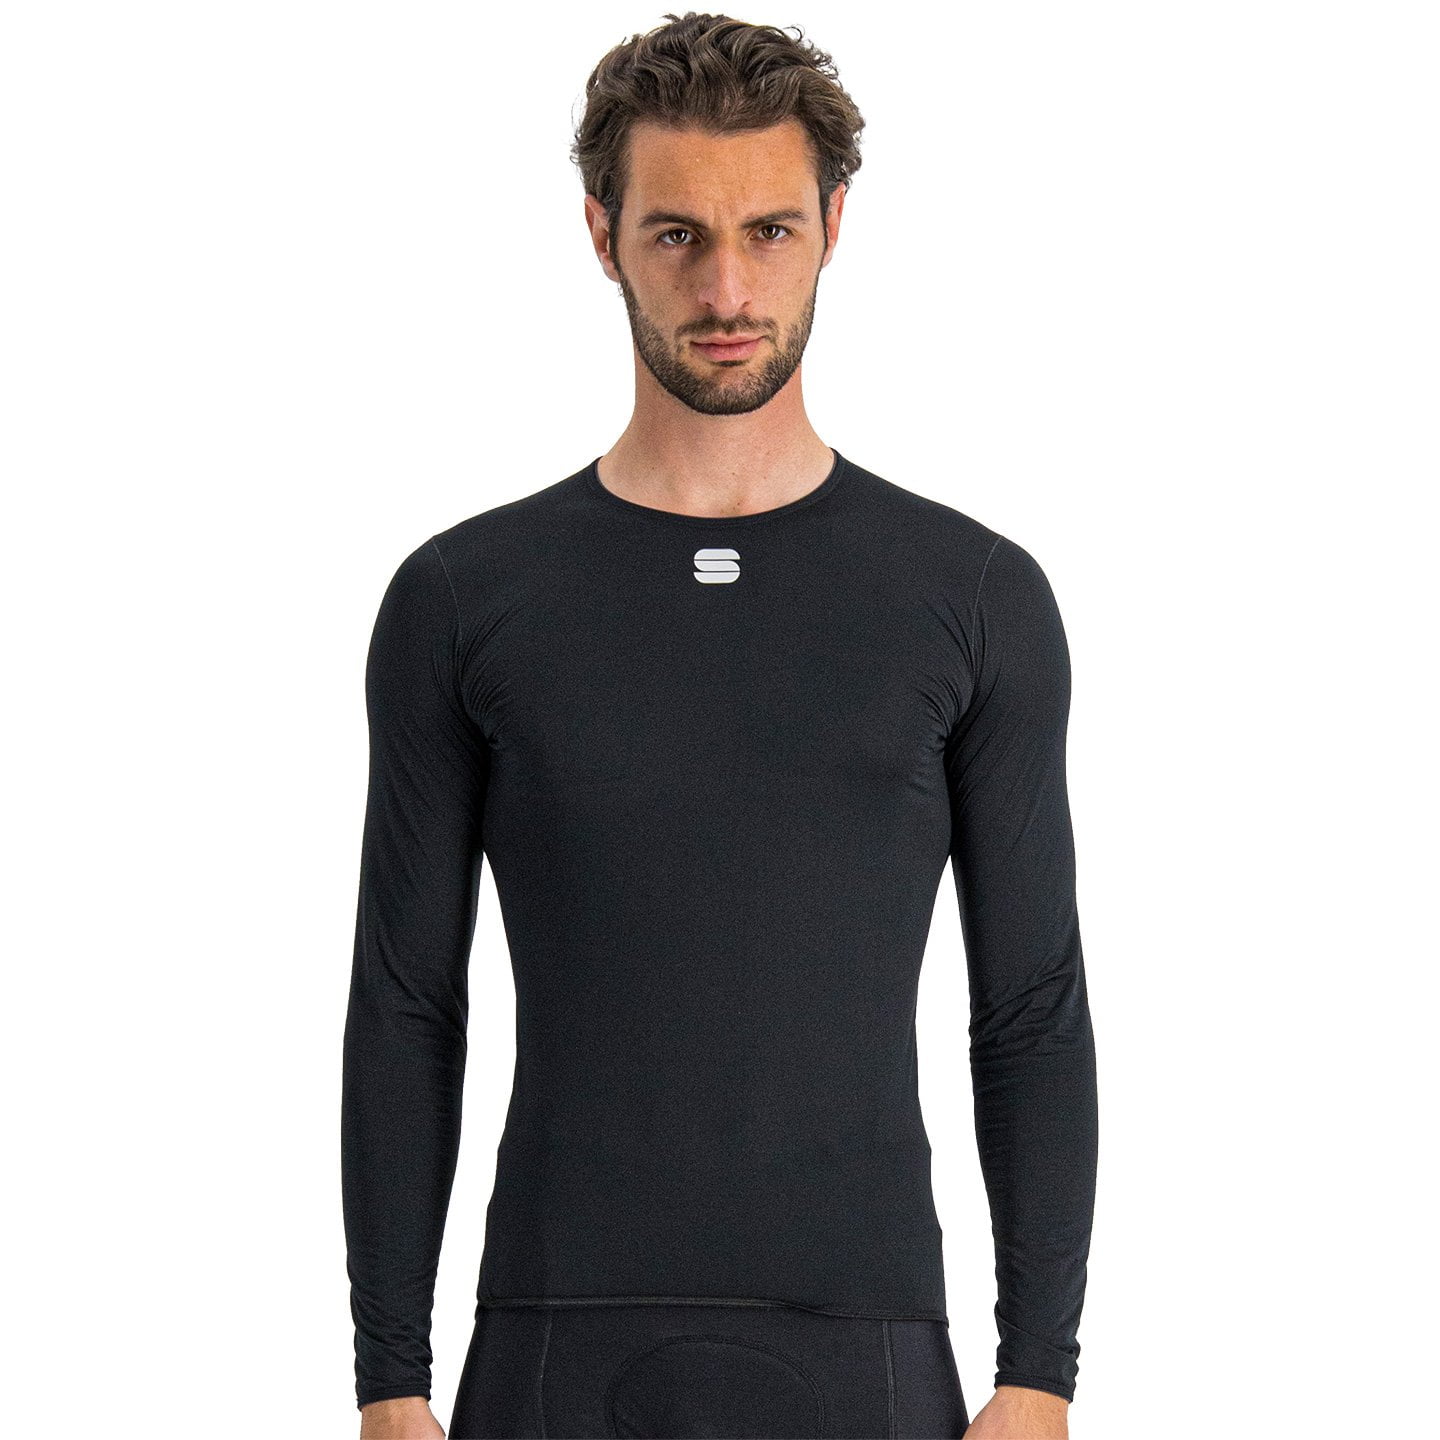 Sportful Midweight Long Sleeve Cycling Base Layer Base Layer, for men, size L, Singlet, Cycle clothing